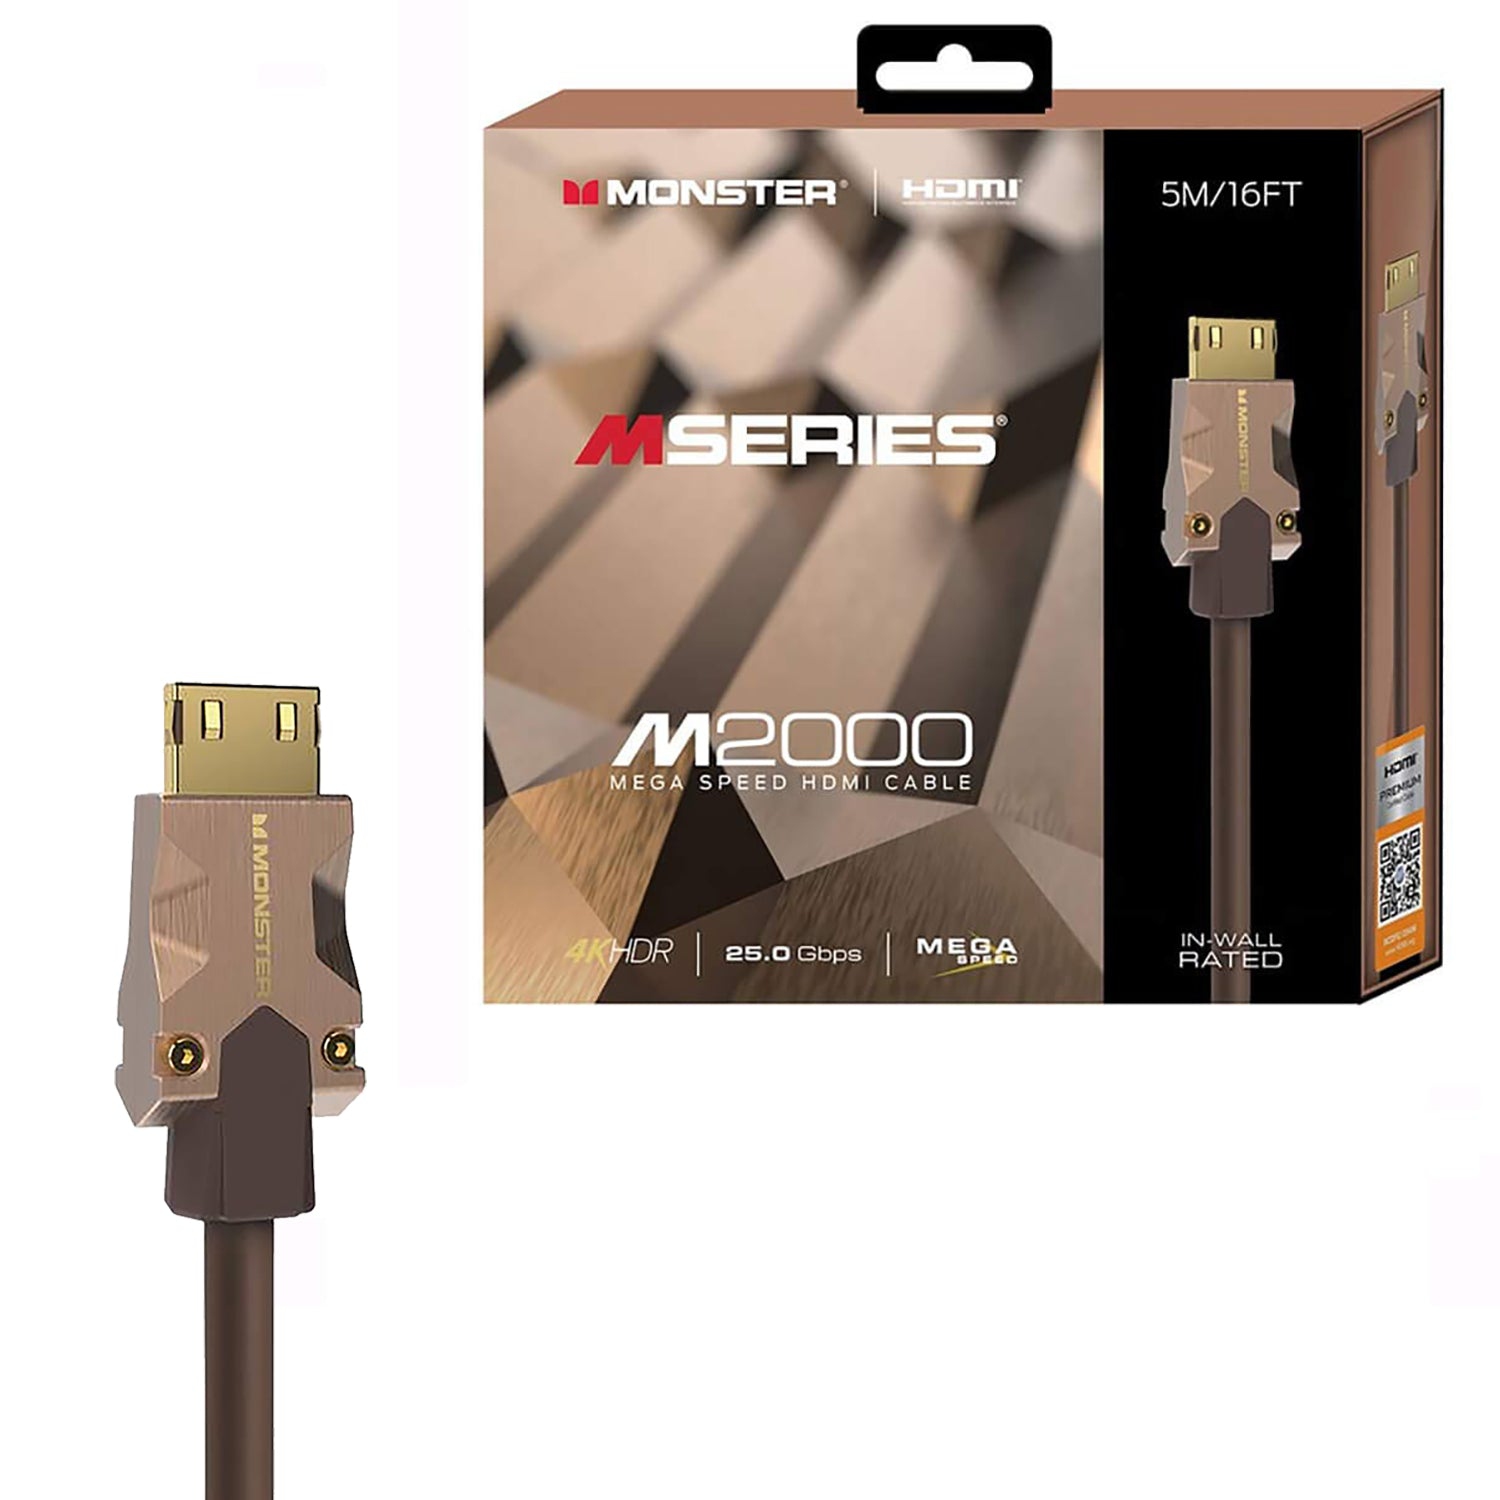 Monster - M Series M 2000 High Speed HDMI Cable, 25GBPS, 16 Feet Length